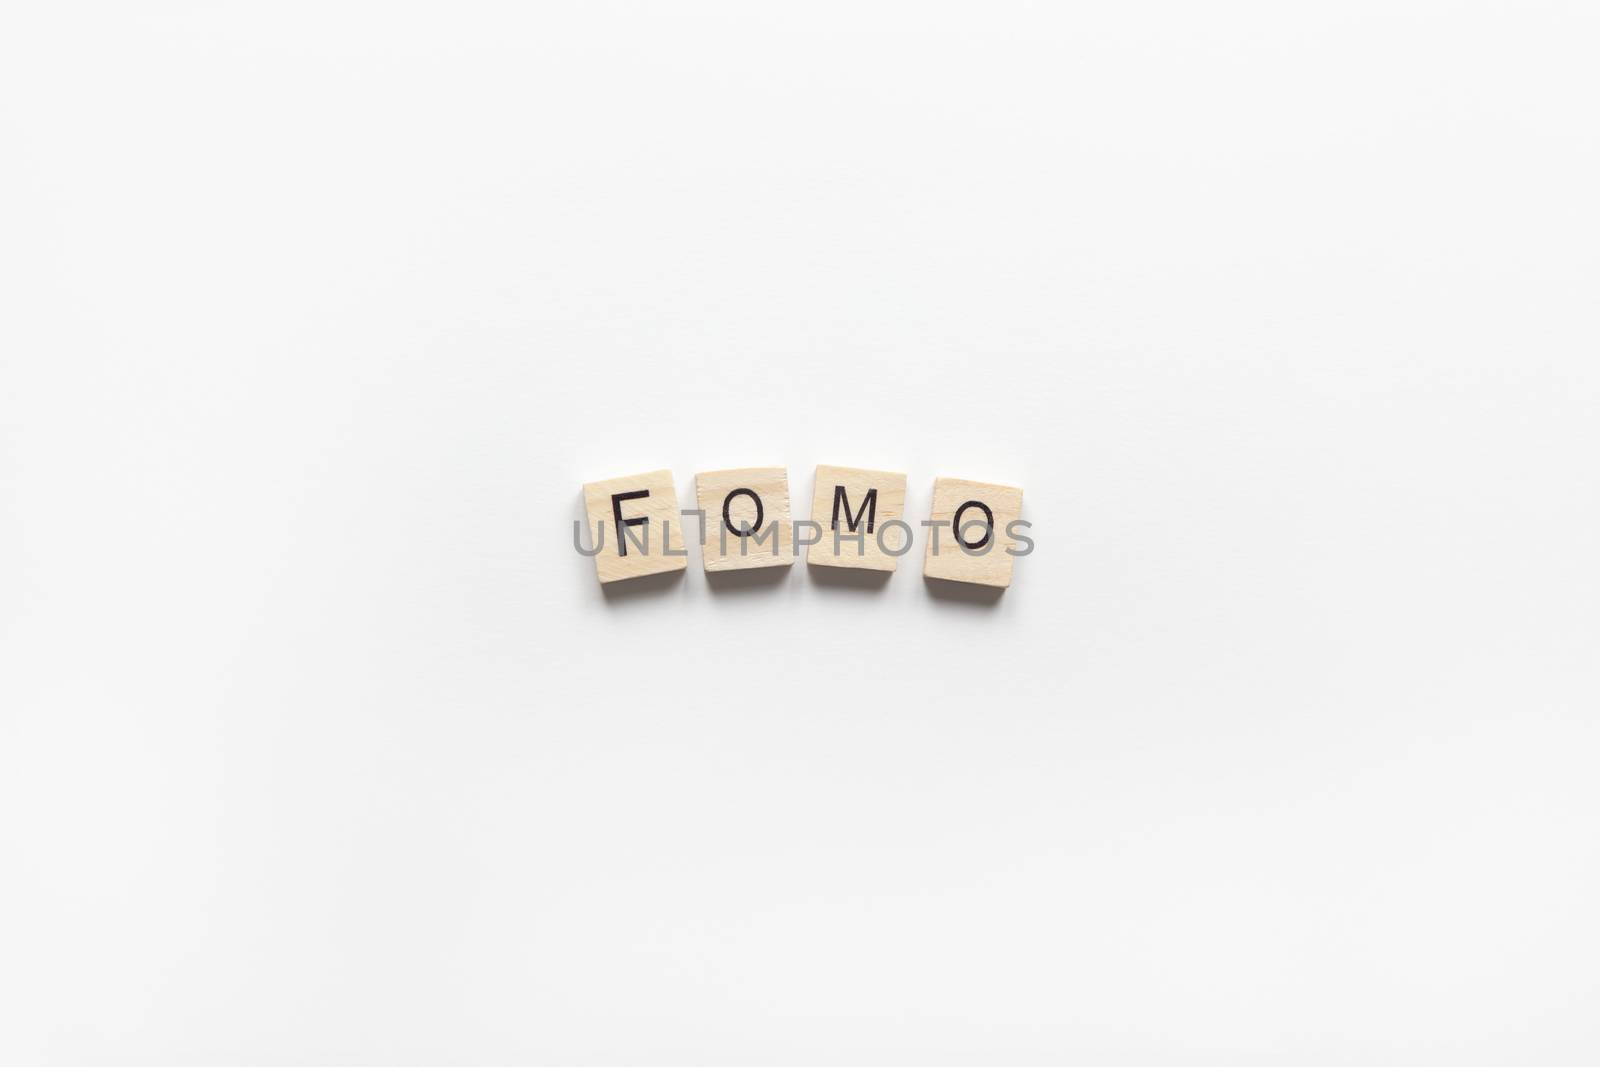 Abbreviation word FOMO from wooden blocks on white background. FOMO means Fear Of Missing Out, non-stop internet surfing. Concept social communication problem between people, digital detox. Flat lay by ALLUNEED